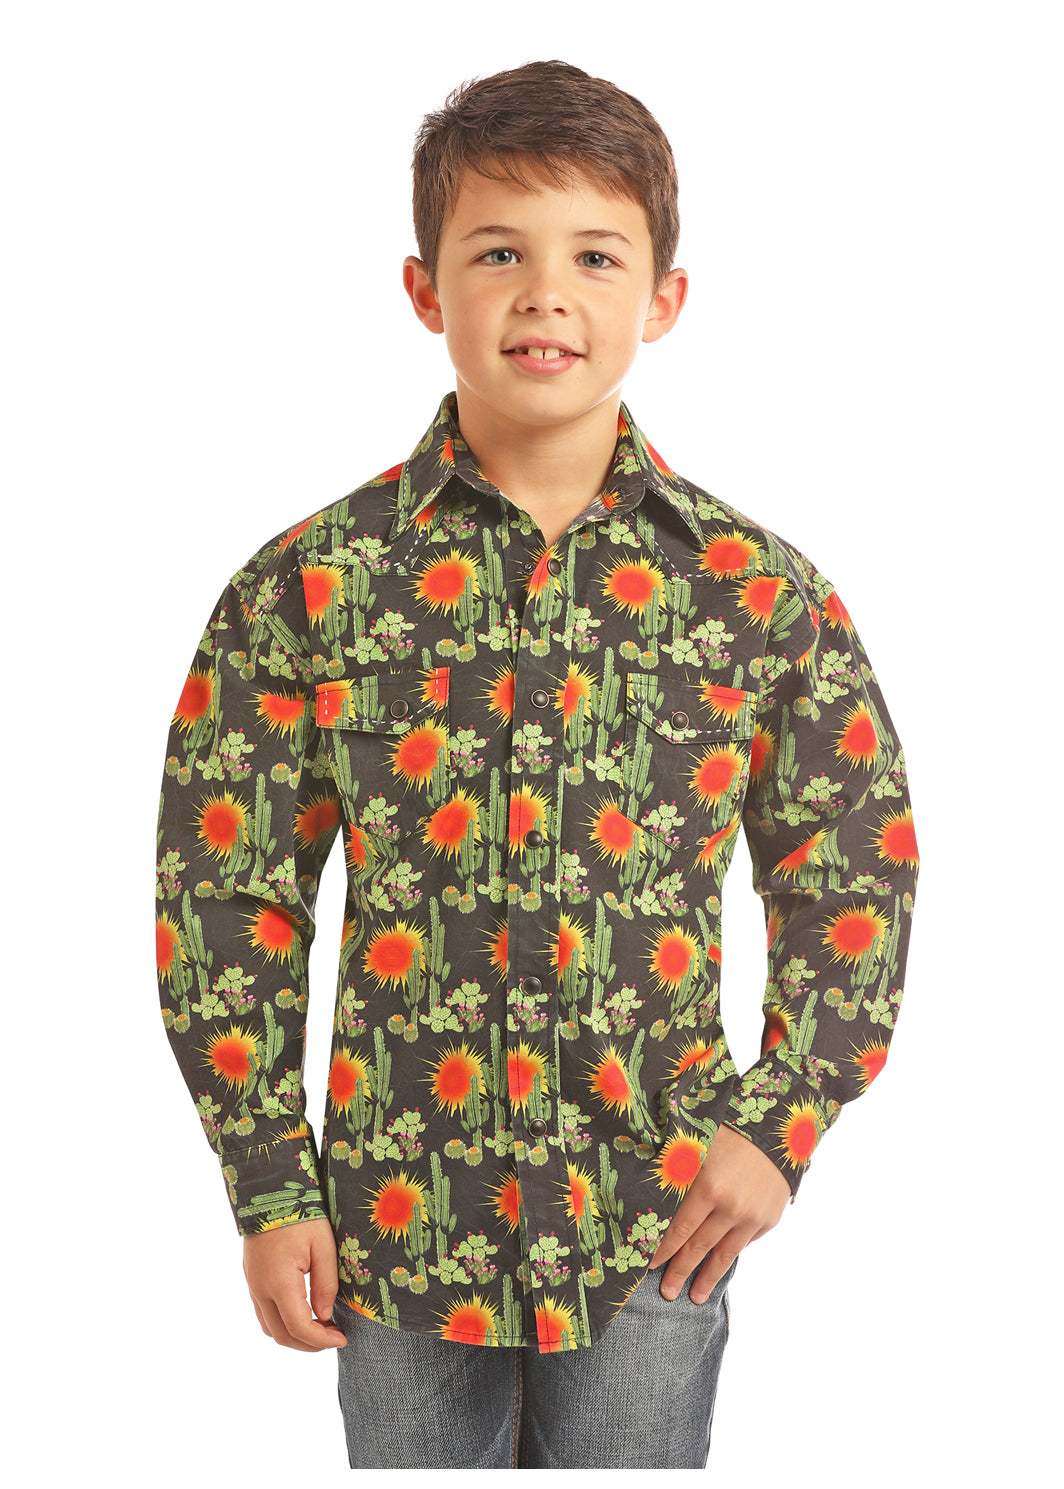 Rock and Roll Boys Dale Brisby Cactus Snap Shirt #B8S2329